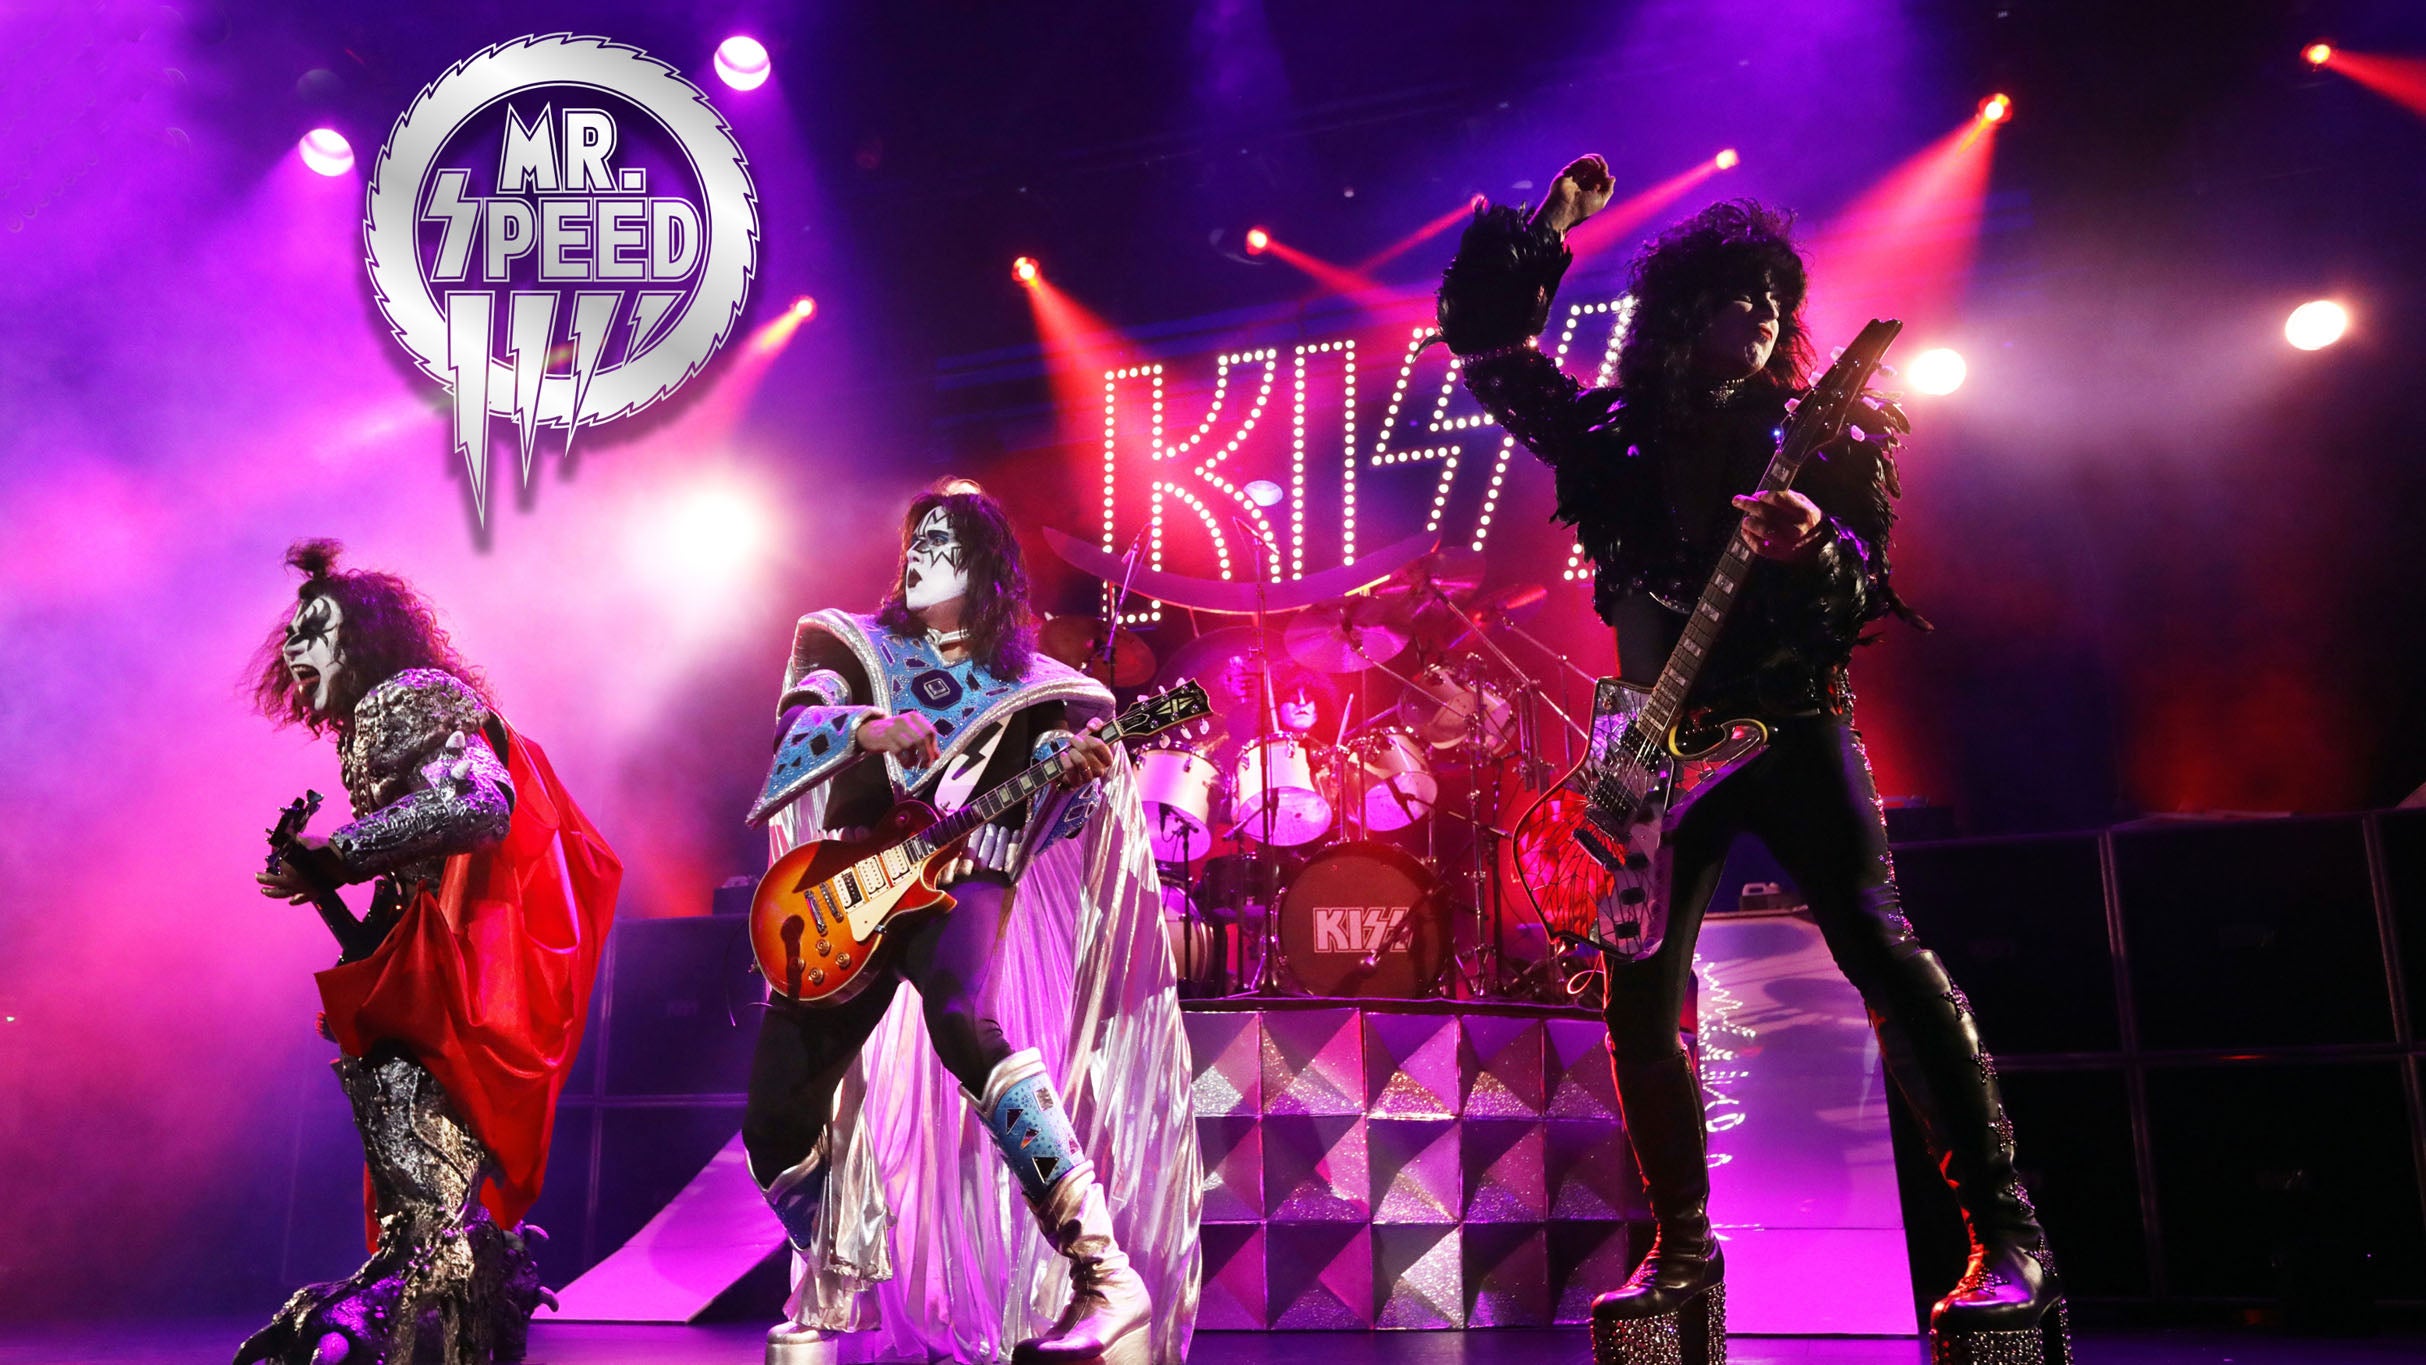 Mr. Speed - A Tribute to Kiss in Cleveland promo photo for Official Platinum presale offer code